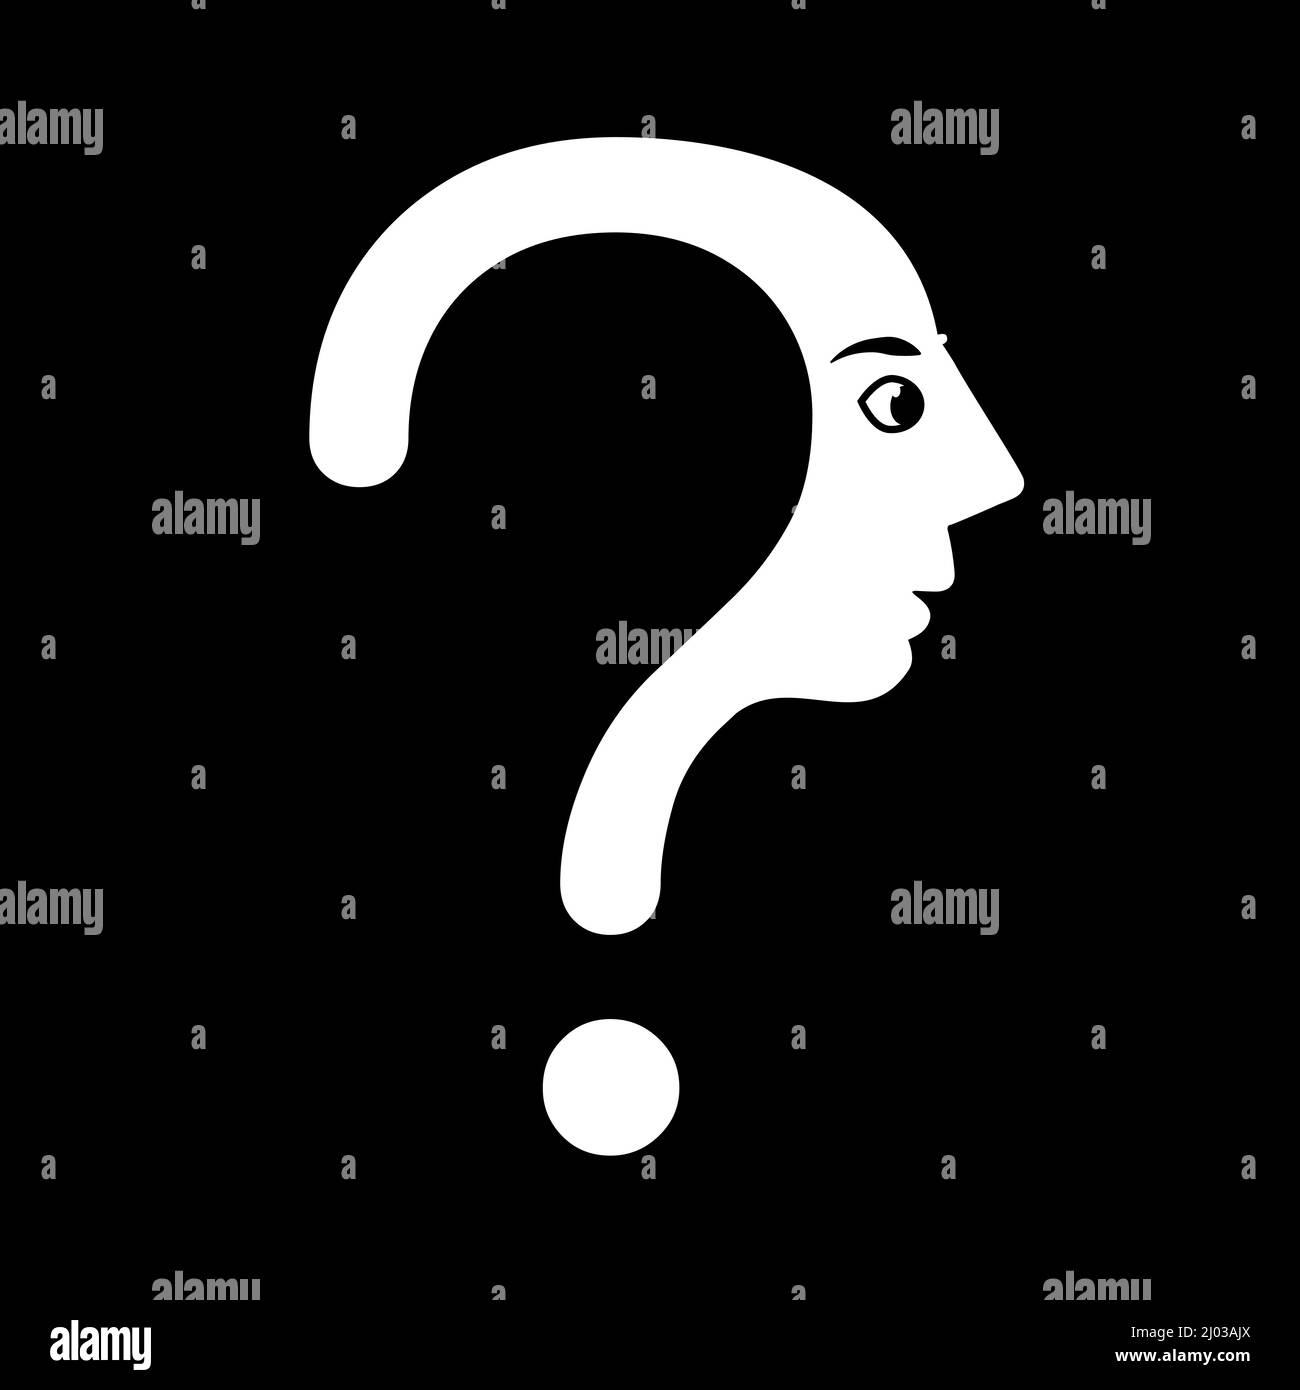 Question mark with face. Face profile silhouette icon vector illustration Stock Vector